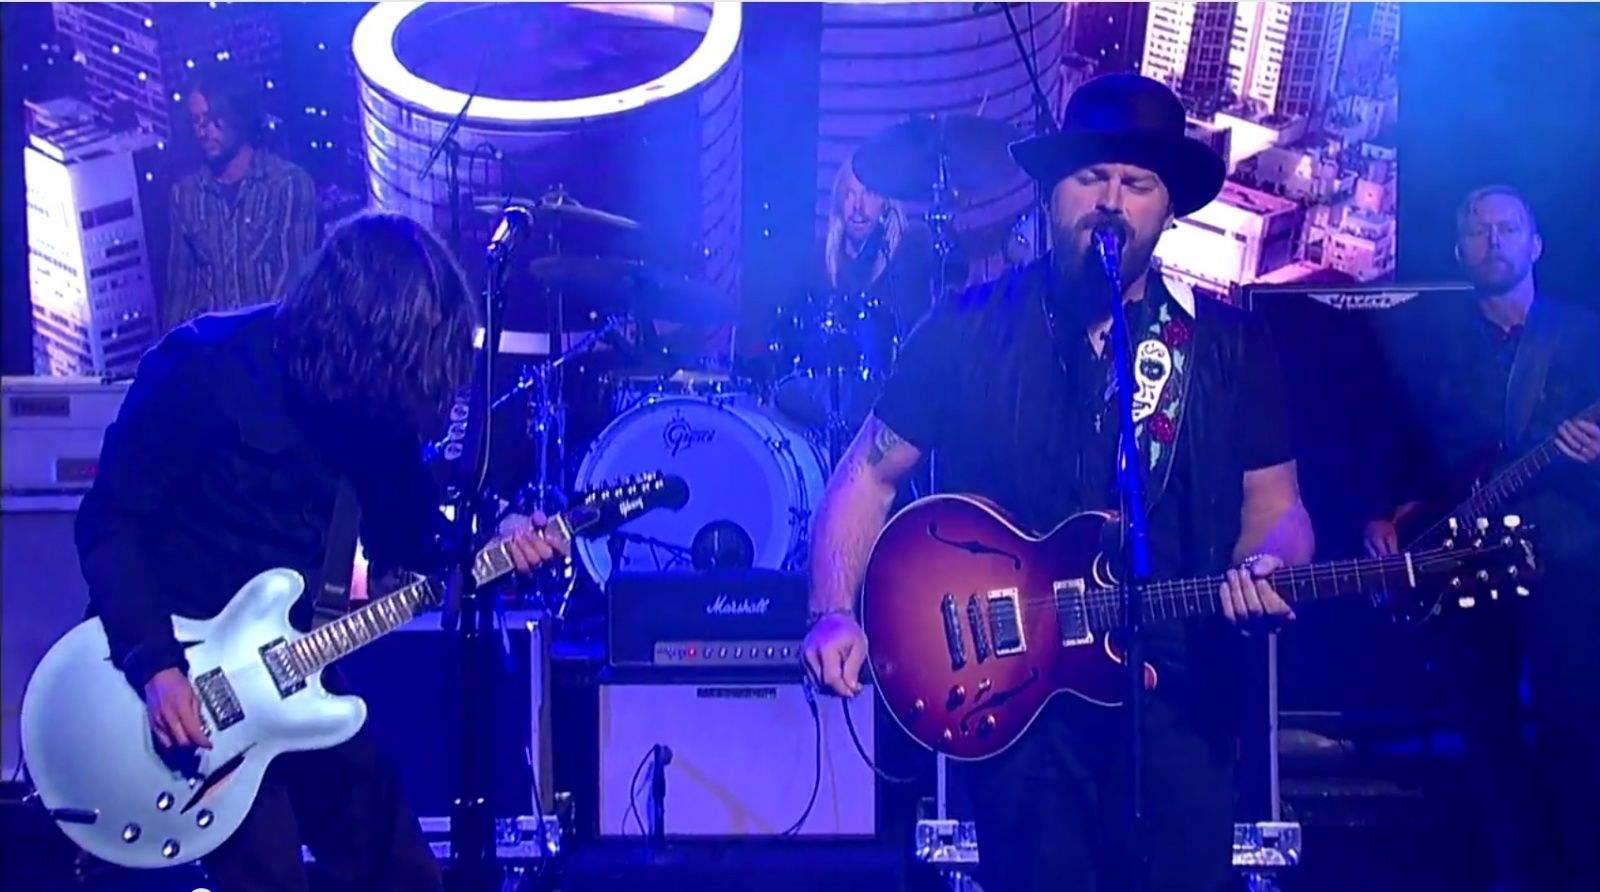 These rockers might have thrilled more people than U2 did. Screen capture: Late Night with David Letterman